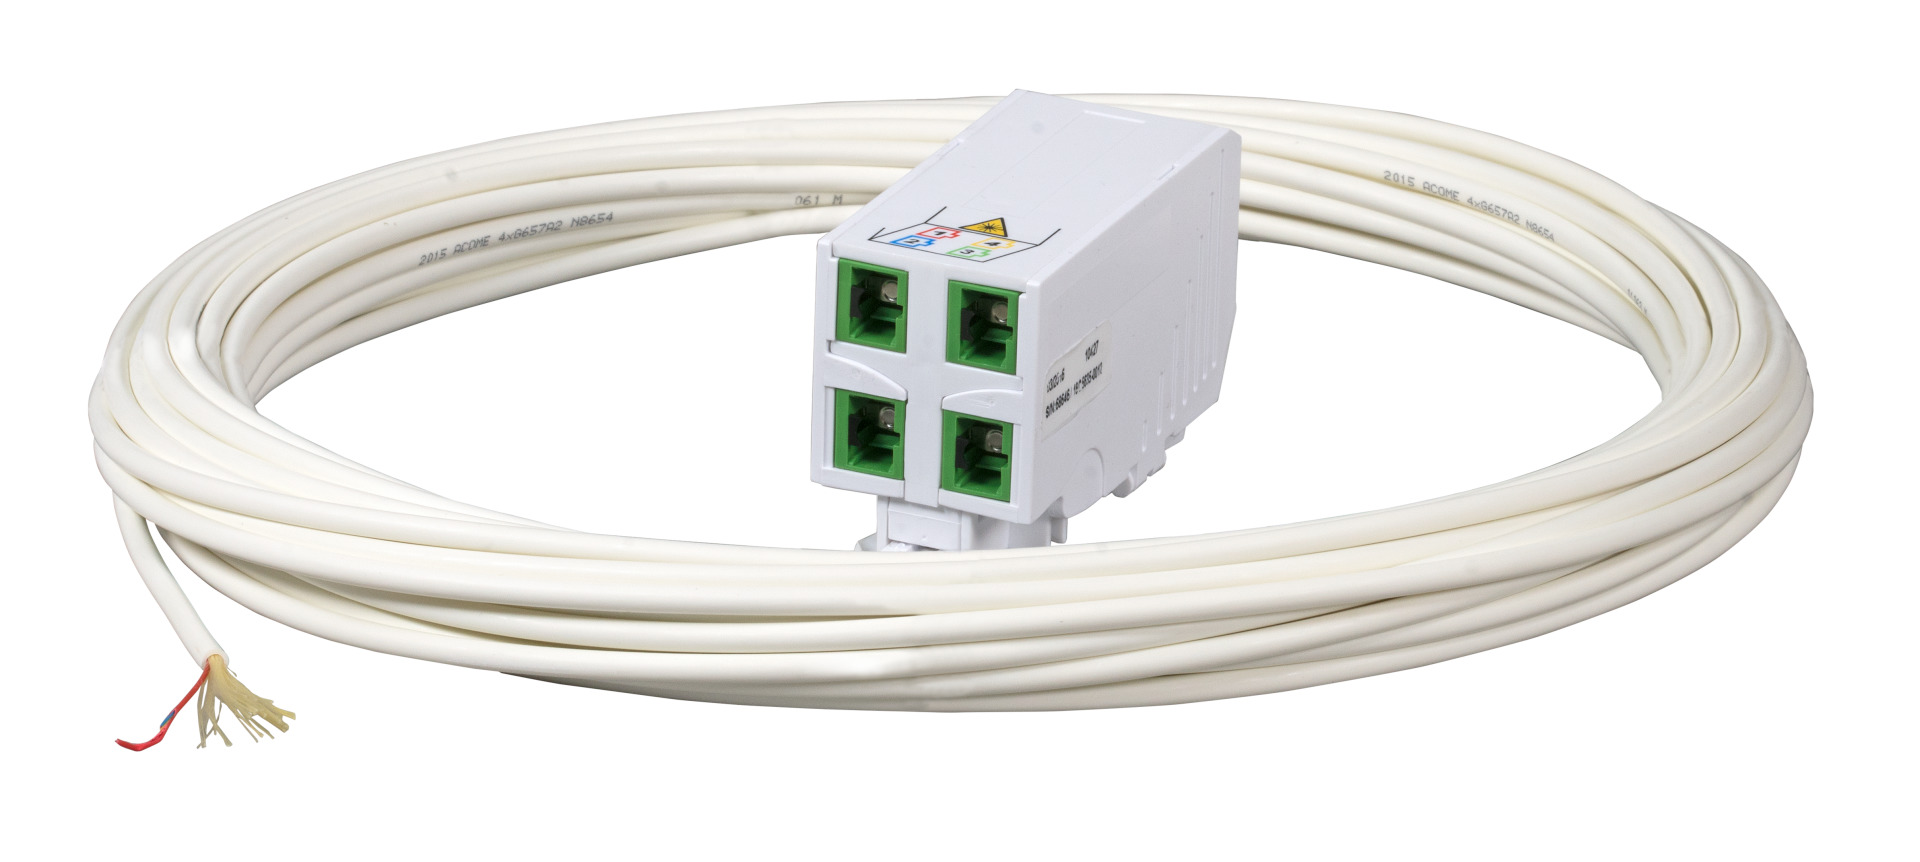 FTTH DIN RAIL Adapter,2x SC/APC adapter, Laserprotection integrated,15m DropCa